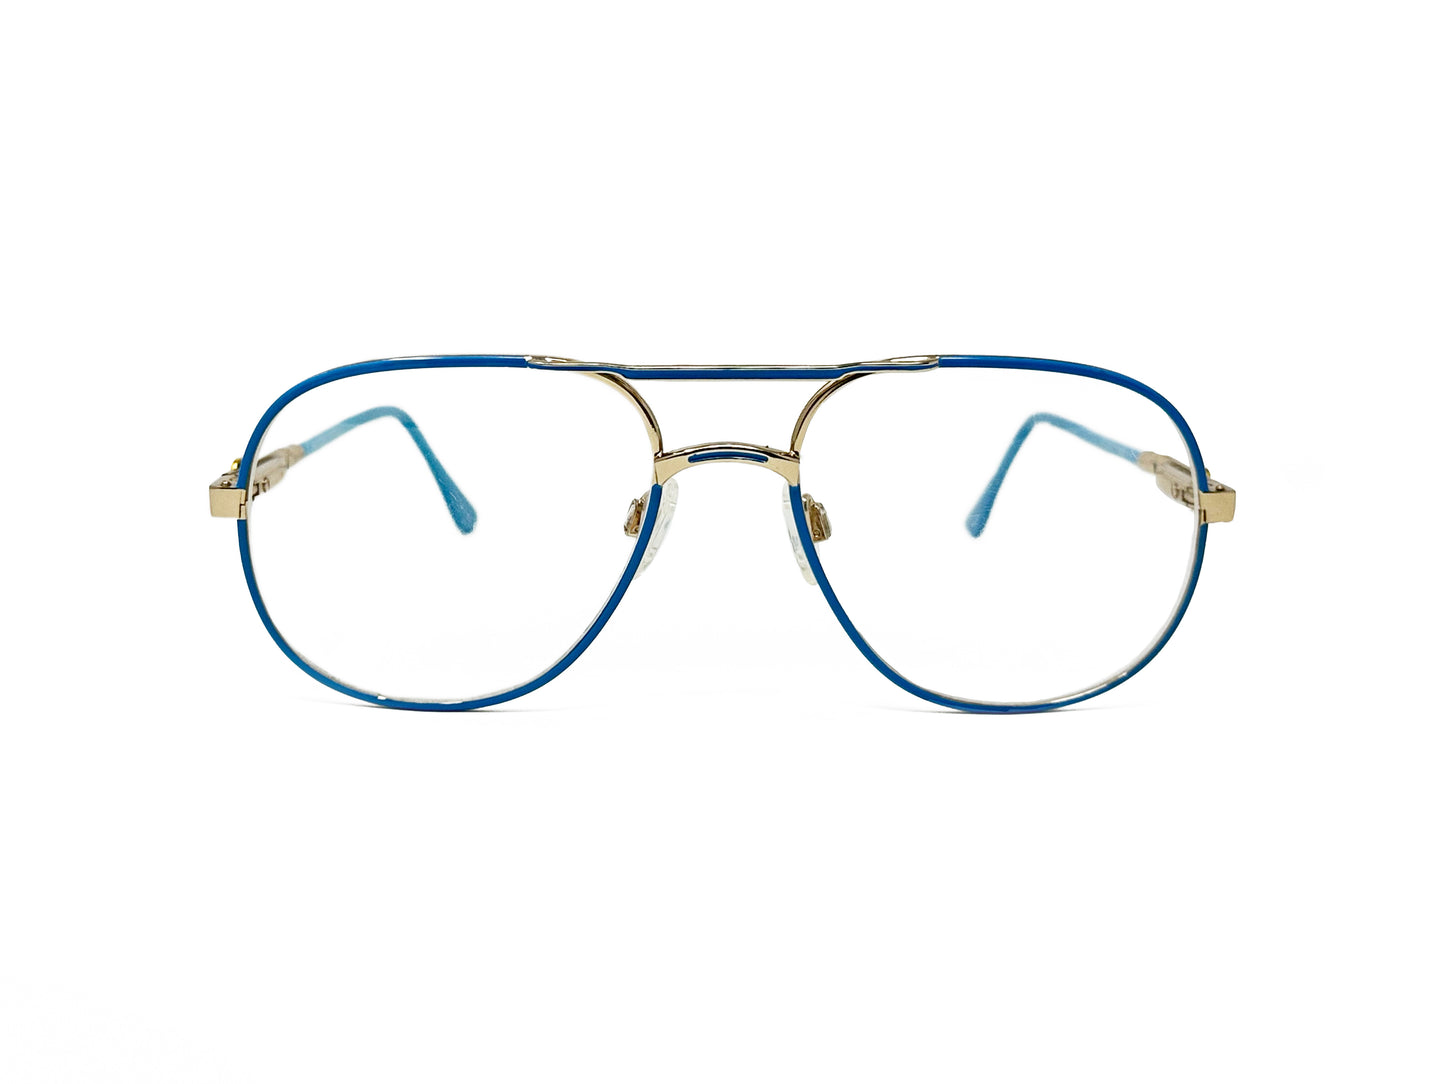 Zollitsch rounded aviator style optical frame. Model: Margit. Color: Dieterle - Sea blue with golden accents on bridge and temple. Front view. 